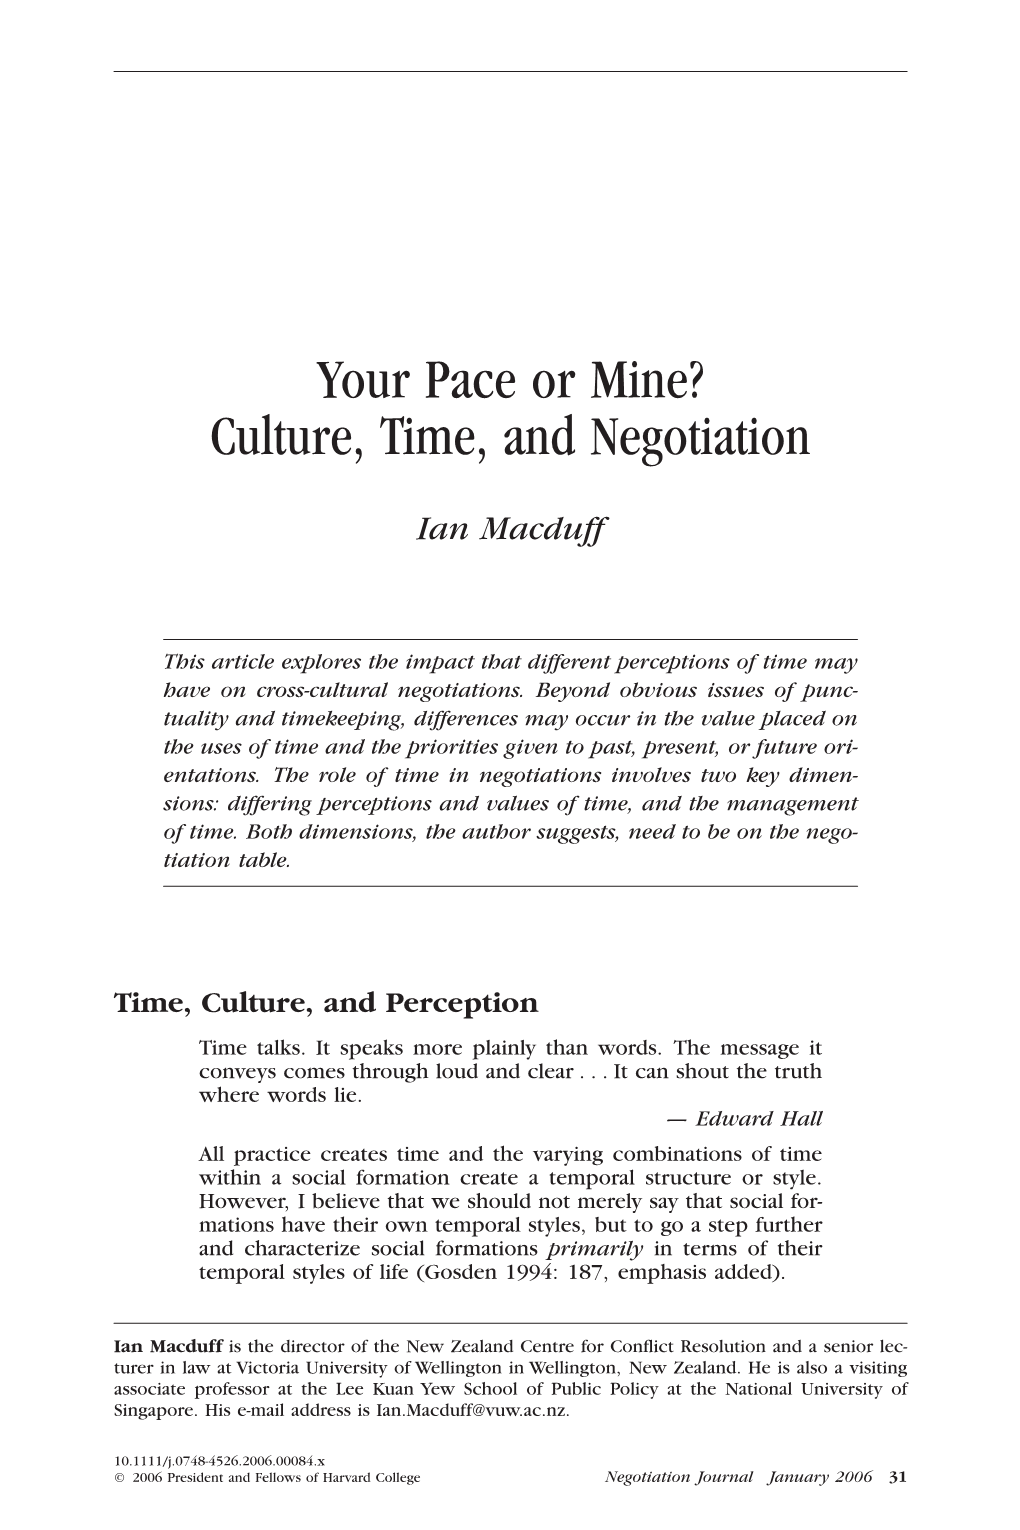 Your Pace Or Mine? Culture, Time, and Negotiation